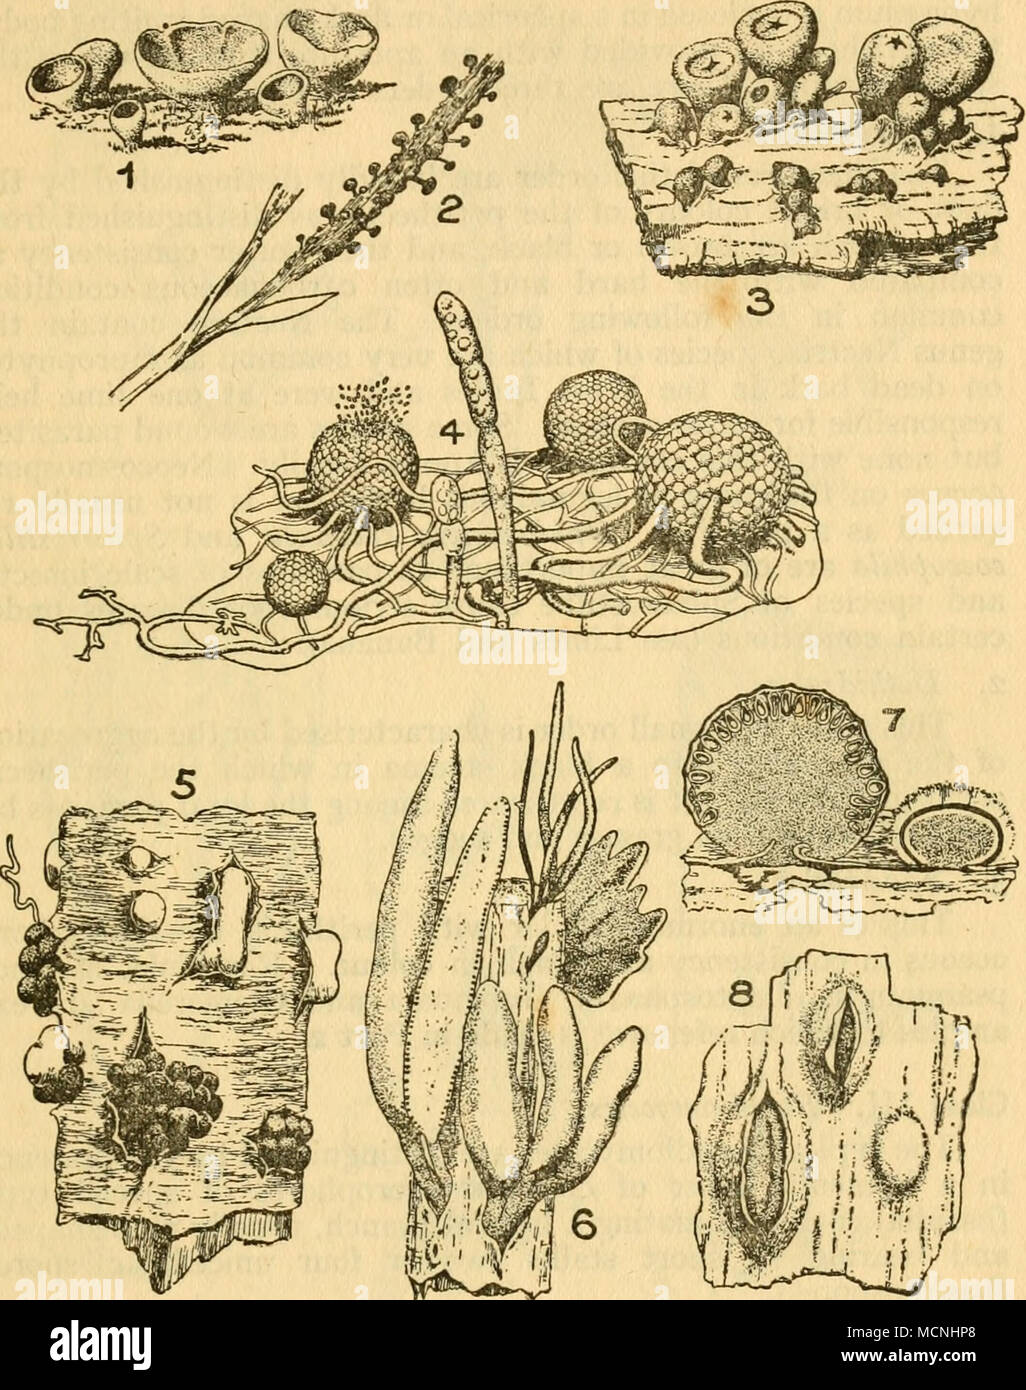 . W'^. Fig. 8 ASCOMYCETES 1. Peziza. 2. Balansia trinitensis. 3. Scleroderris. 4. Perithecia and Conidia of an Erysiphe. 5. Nectria 6. Xylaria. 7. Hypoxylon. 8. Pseudovalsa. From Engler &amp; Prantl. Nat. Pflanz. Perisporiacese (which include the fungi of &quot;black blight&quot;) have mycelium which is superficial on the host plant, commonly on leaves, and have the asci enclosed in more or less spherical Stock Photo